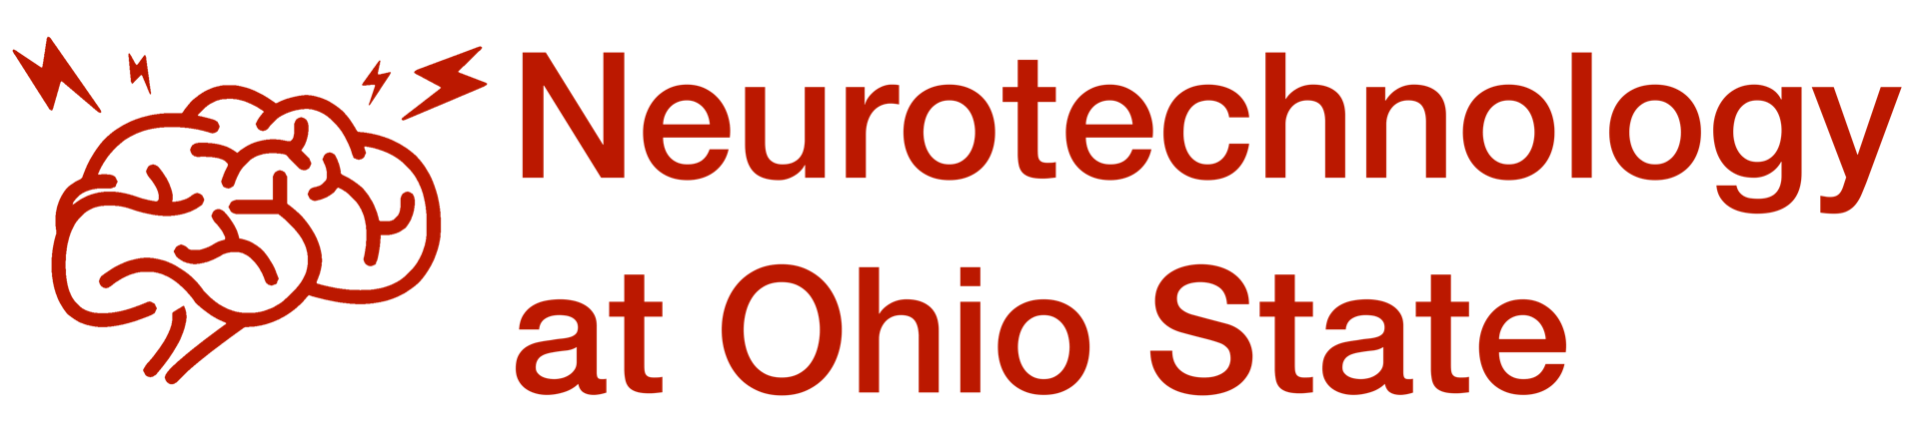 NeuroTechnology at Ohio State